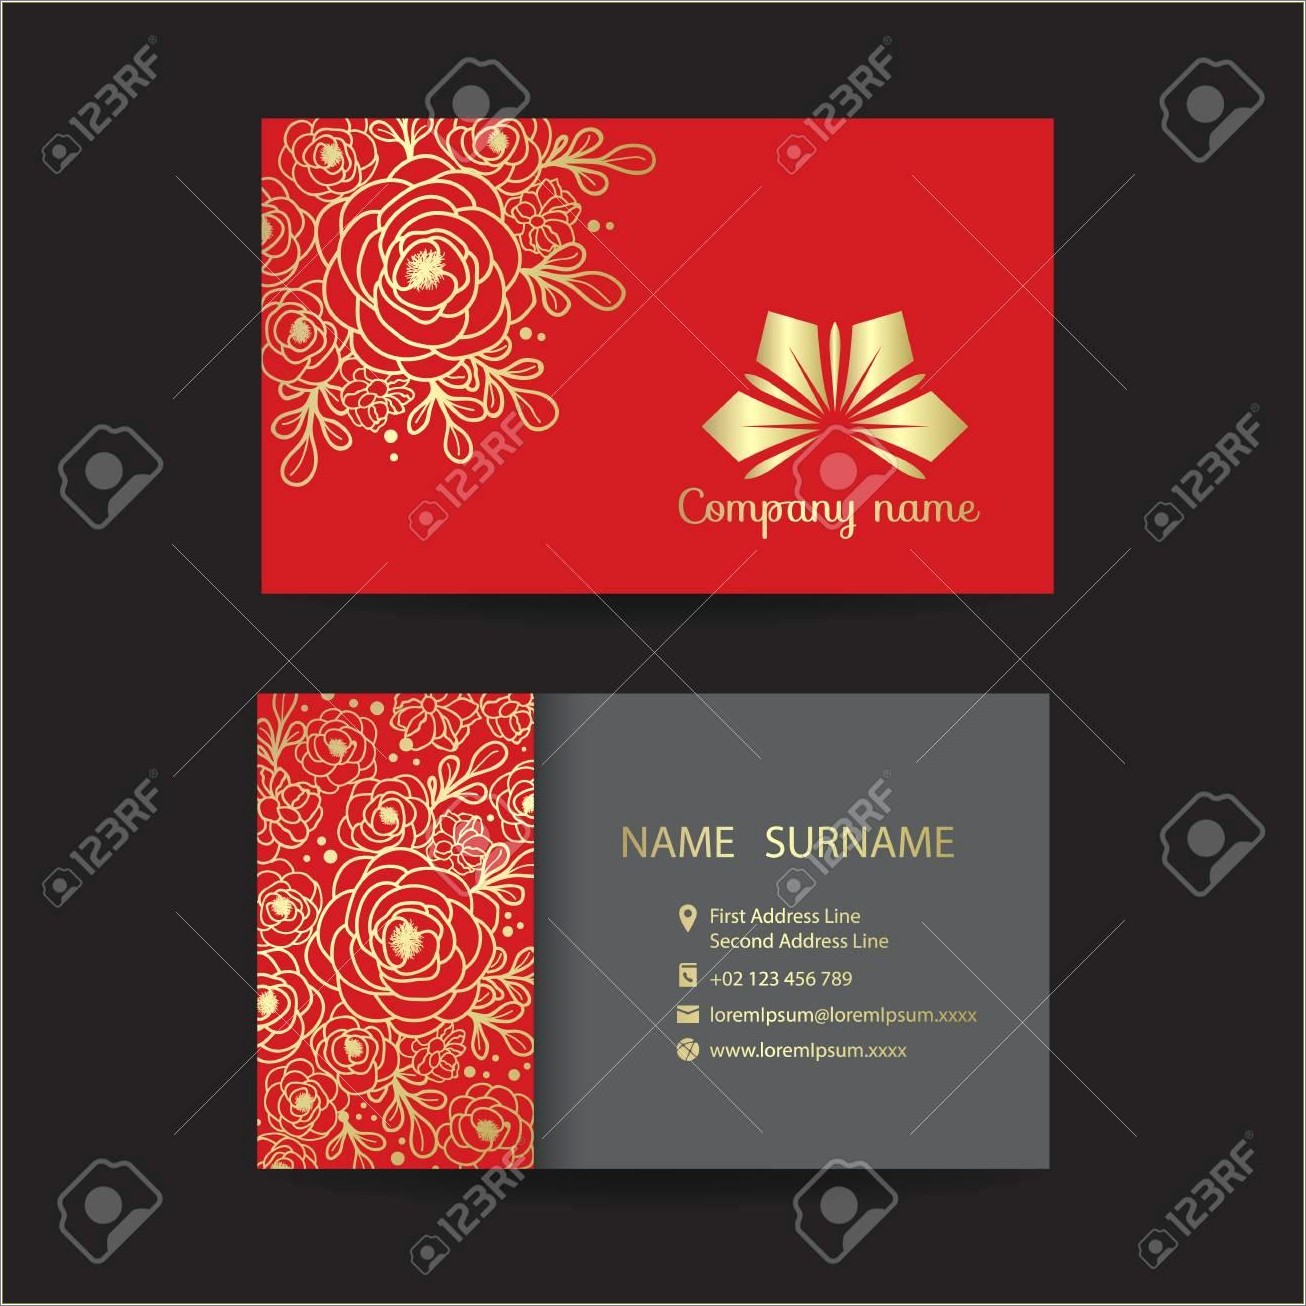 Free Borders Templates For Business Cards